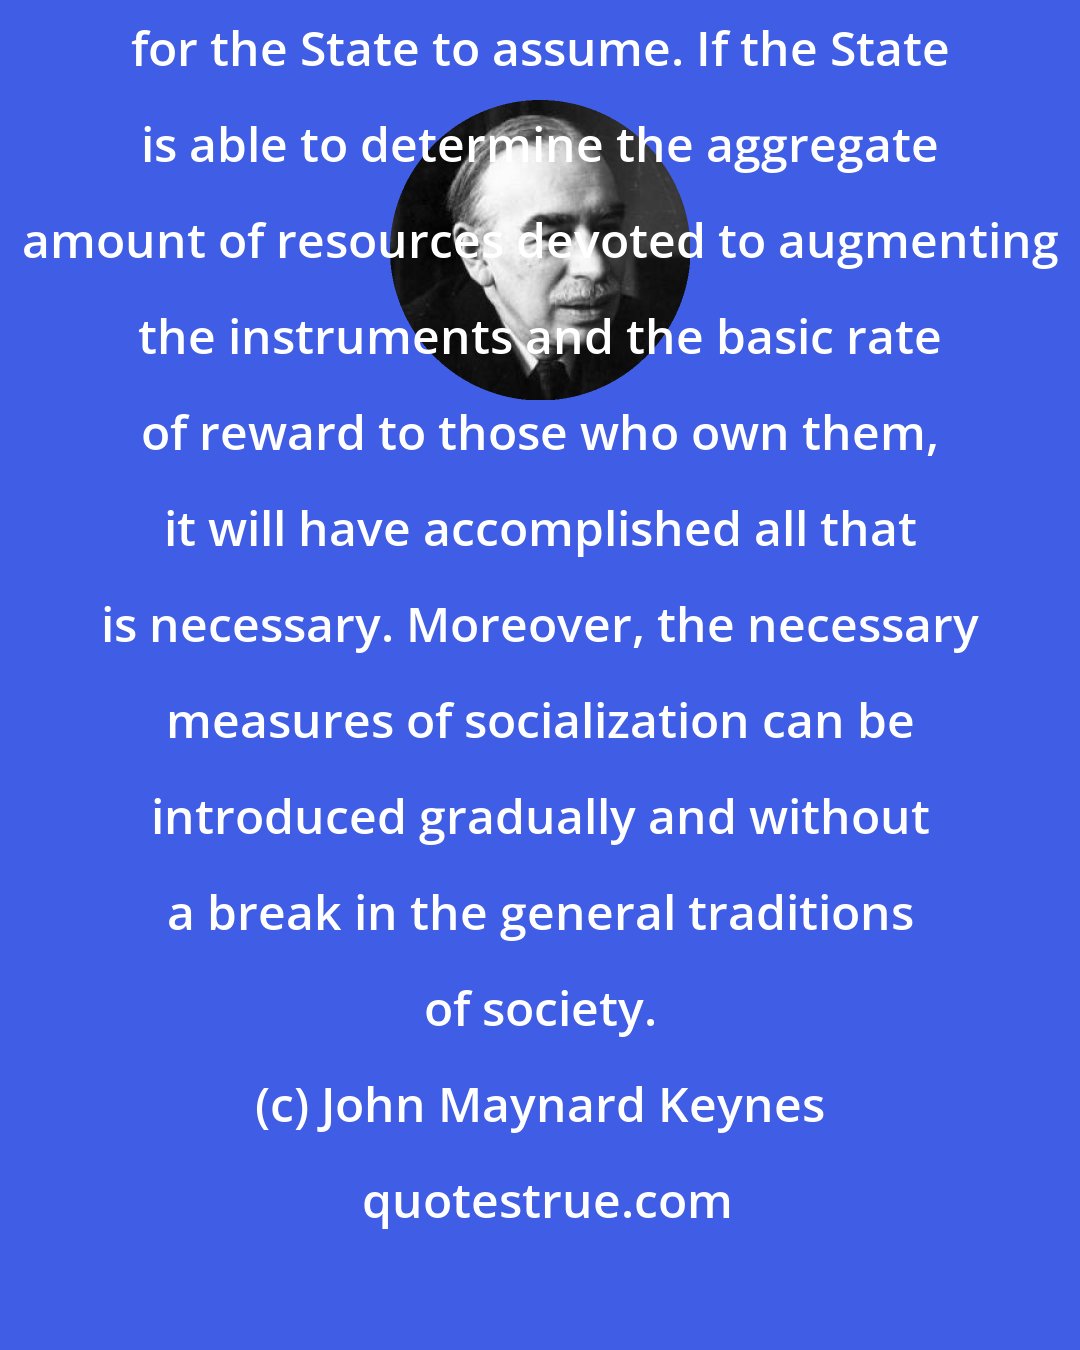 John Maynard Keynes: It is not the ownership of the instruments of production which it is important for the State to assume. If the State is able to determine the aggregate amount of resources devoted to augmenting the instruments and the basic rate of reward to those who own them, it will have accomplished all that is necessary. Moreover, the necessary measures of socialization can be introduced gradually and without a break in the general traditions of society.